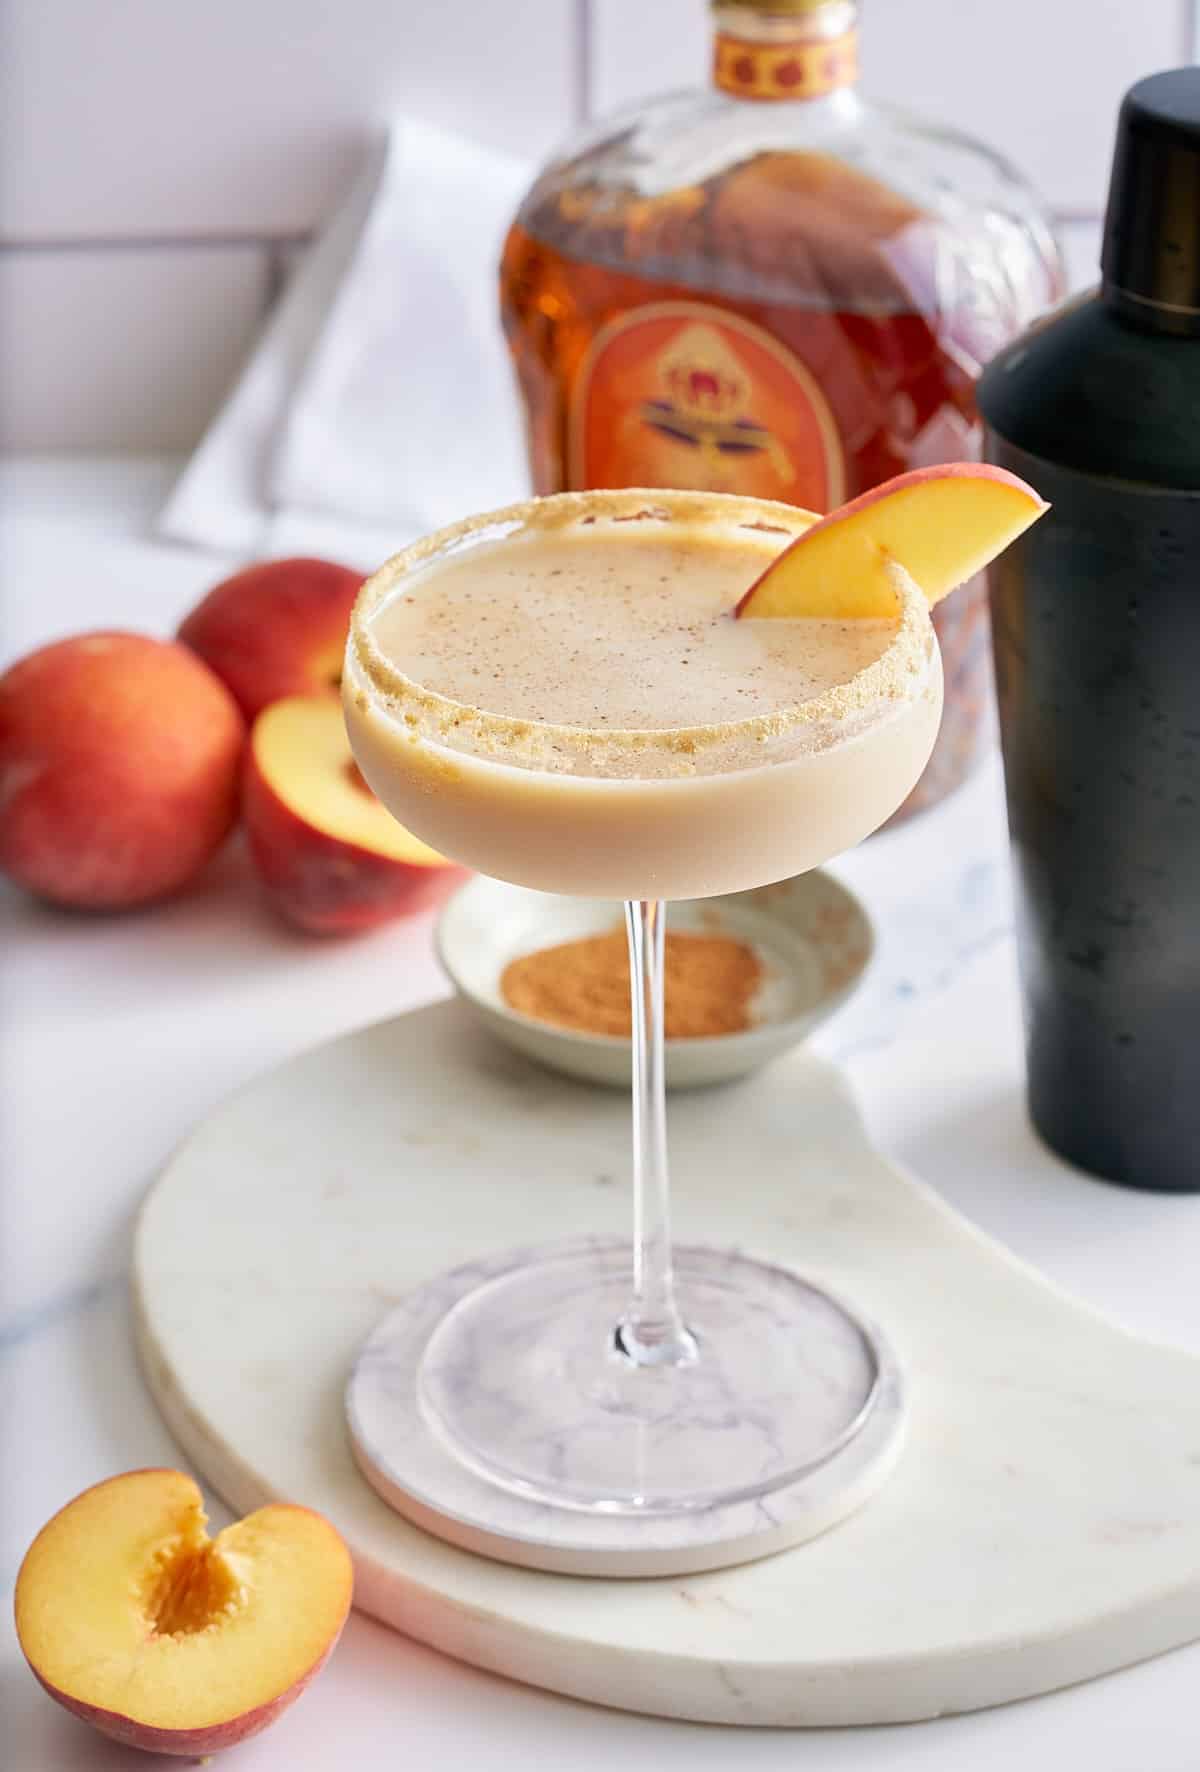 Peach cobbler cocktail in a Graham cracker sugar rimmed glass, garnished with a slice of fresh peach, with a black cocktail shaker, a bottle of peach whiskey and whole peaches set alongside.